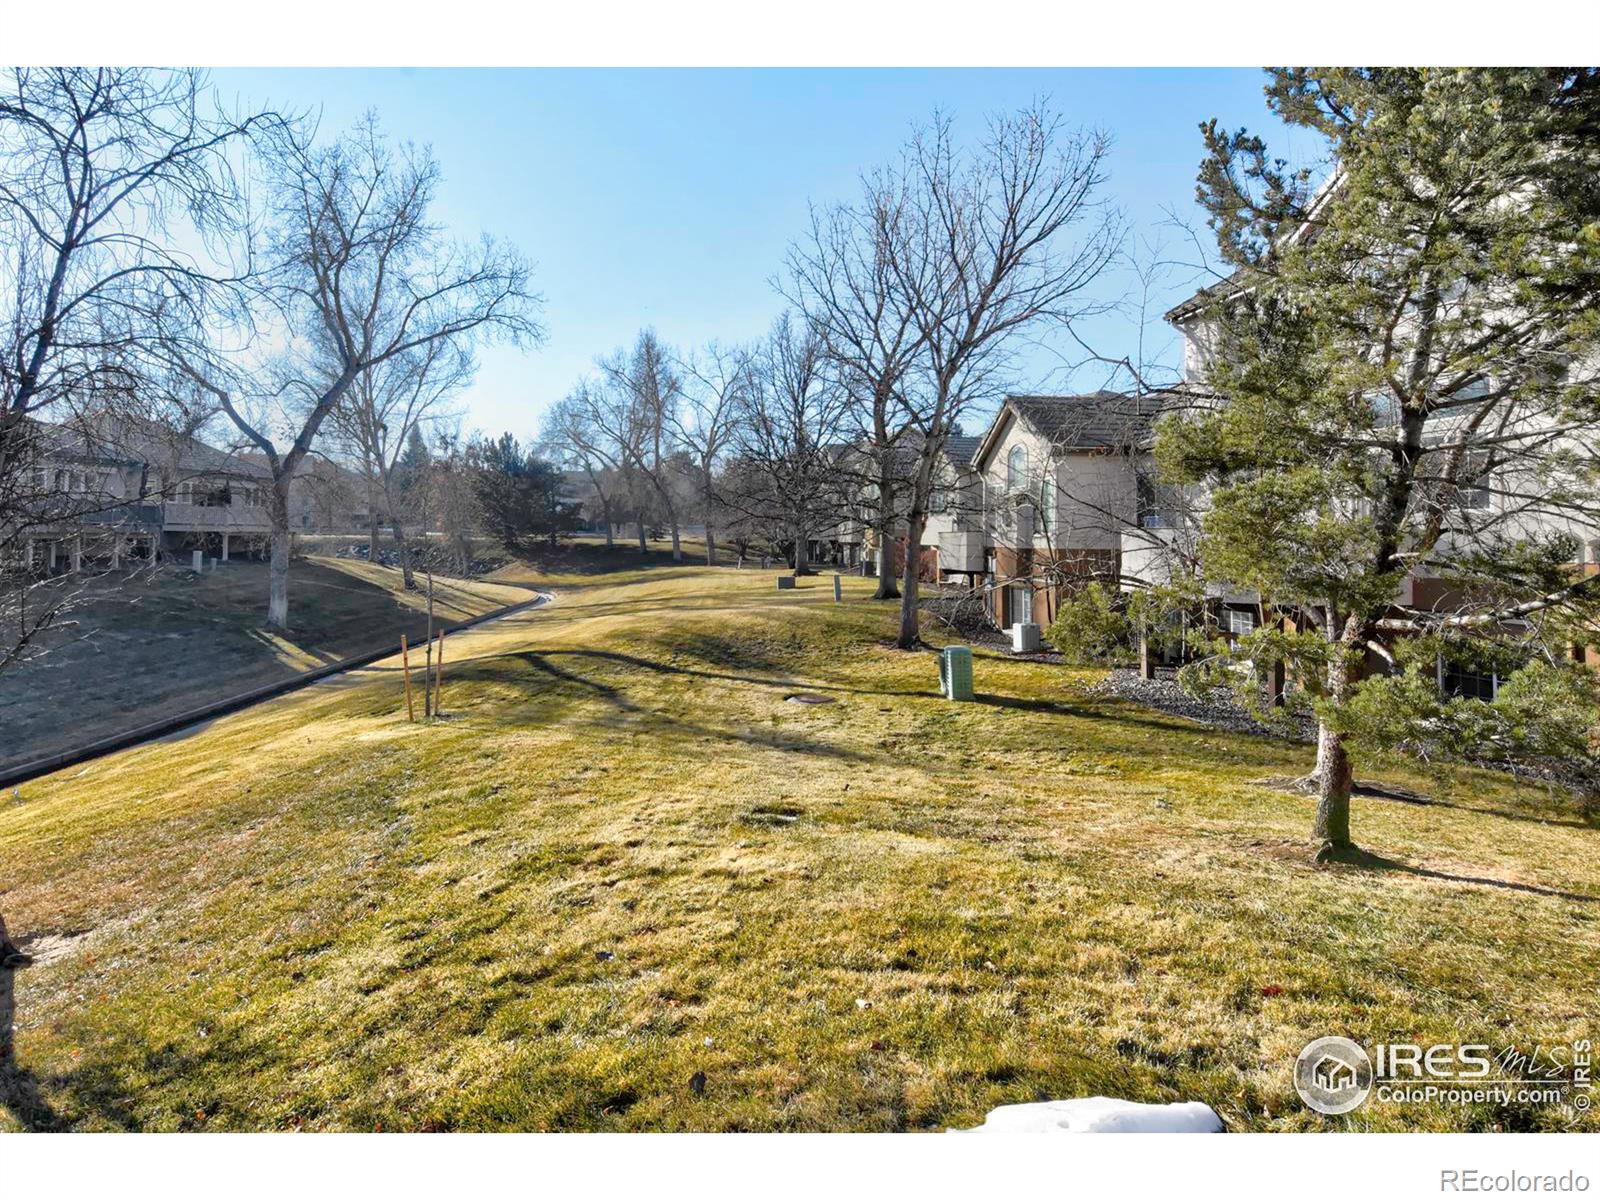 Report Image for 2727 W 107th Court,Westminster, Colorado